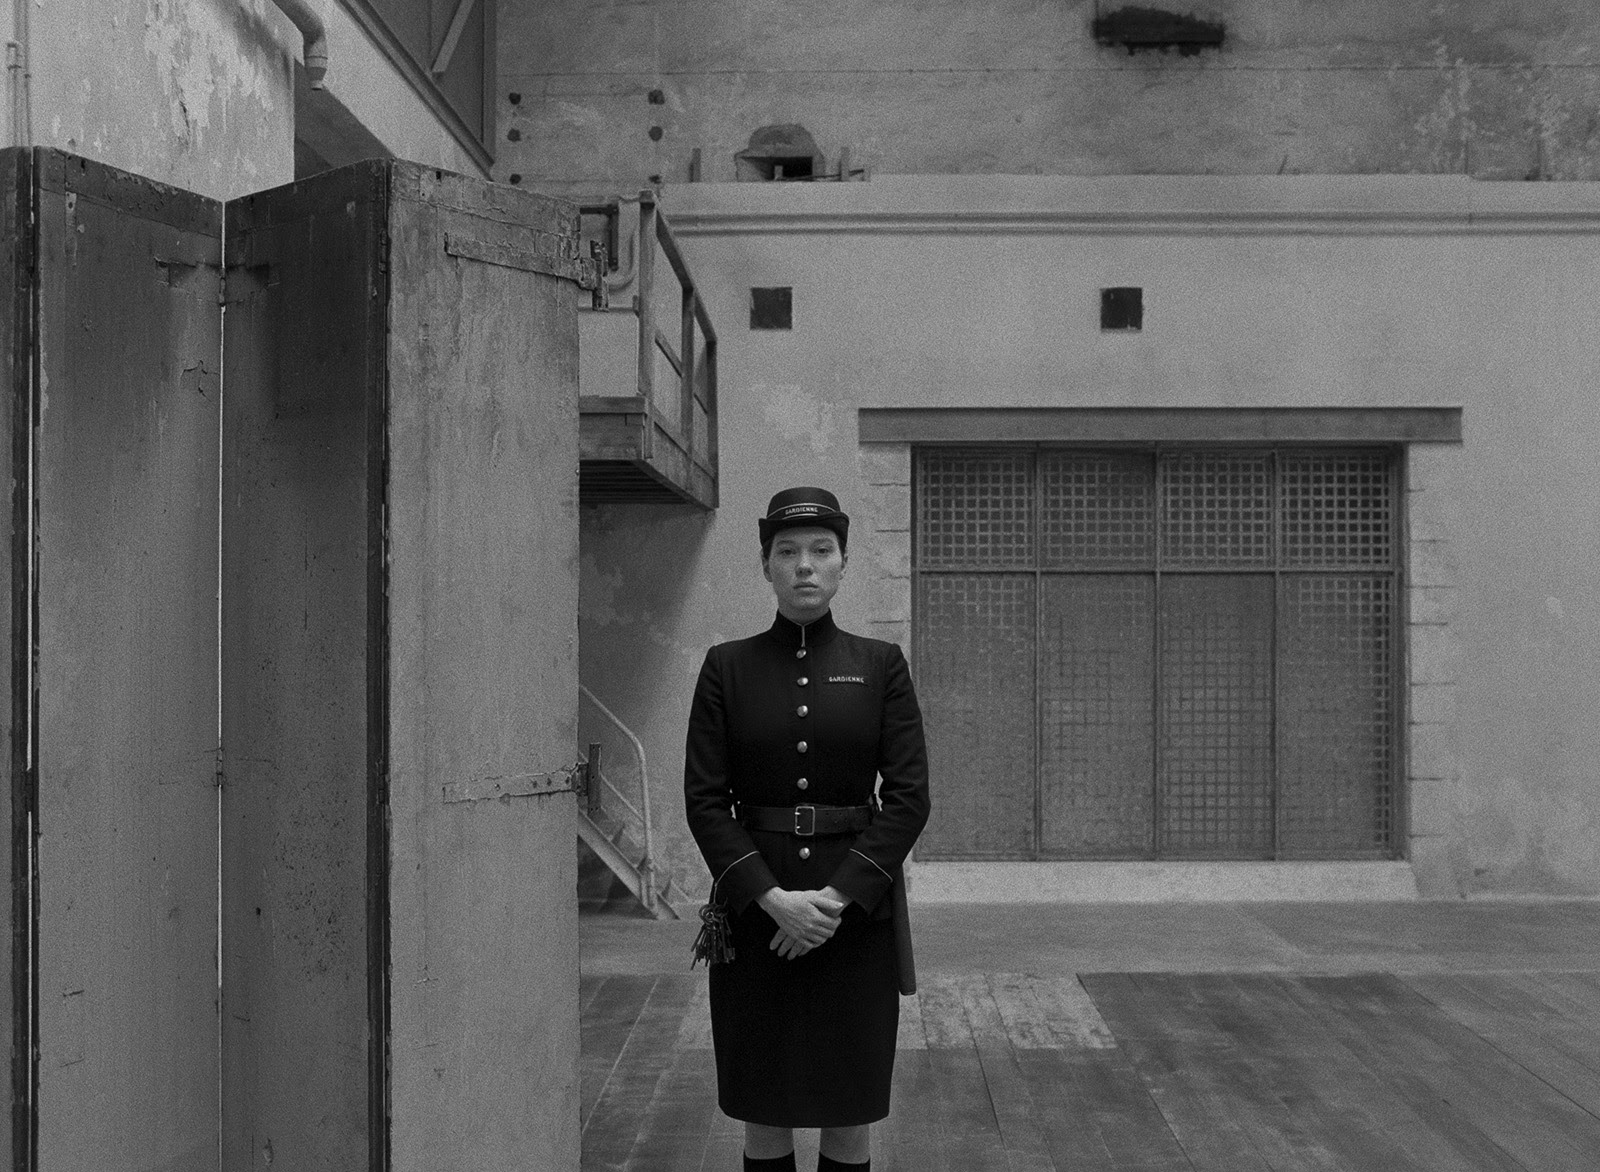 Léa Seydoux as prison guard and muse, Simone, in The French Dispatch. Image © Searchlight Pictures